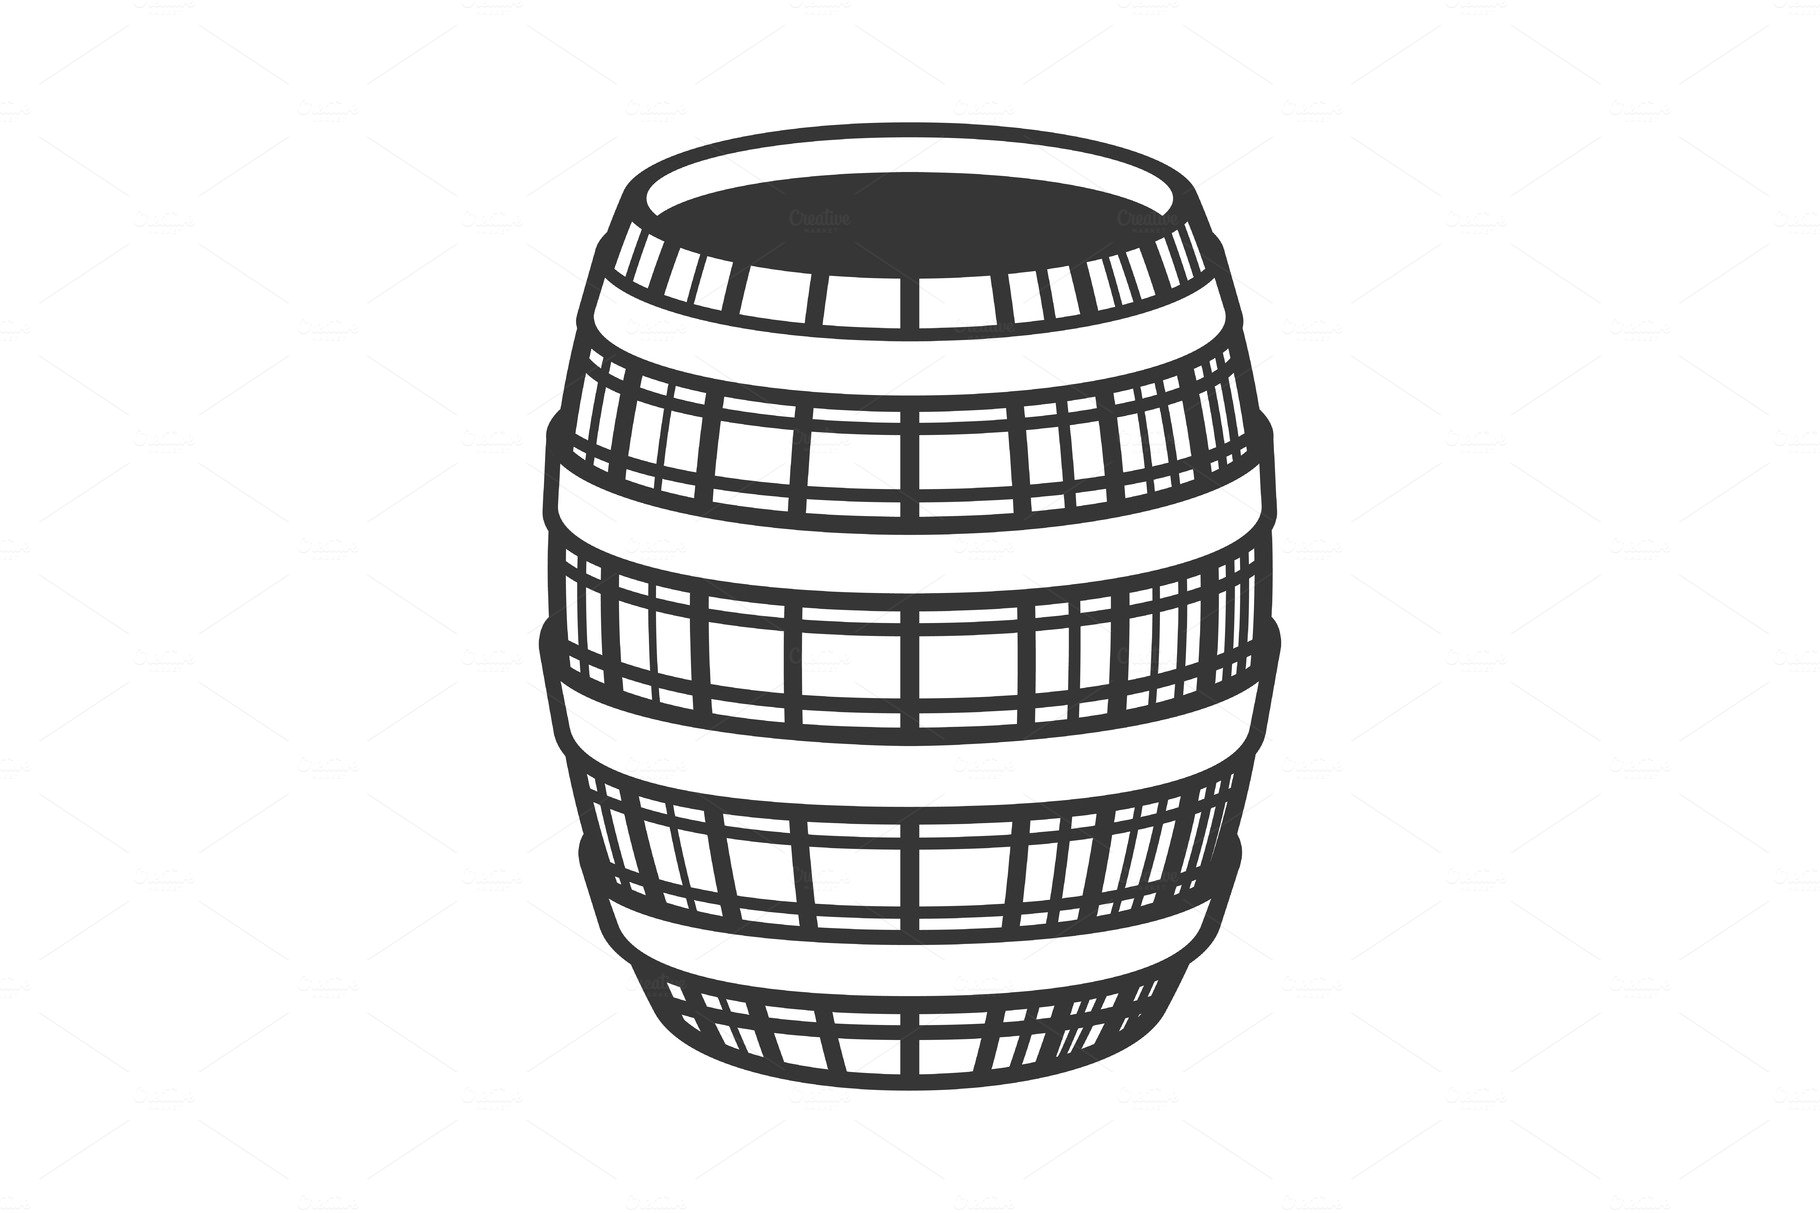 Wine Wooden Barrel Icon on White cover image.